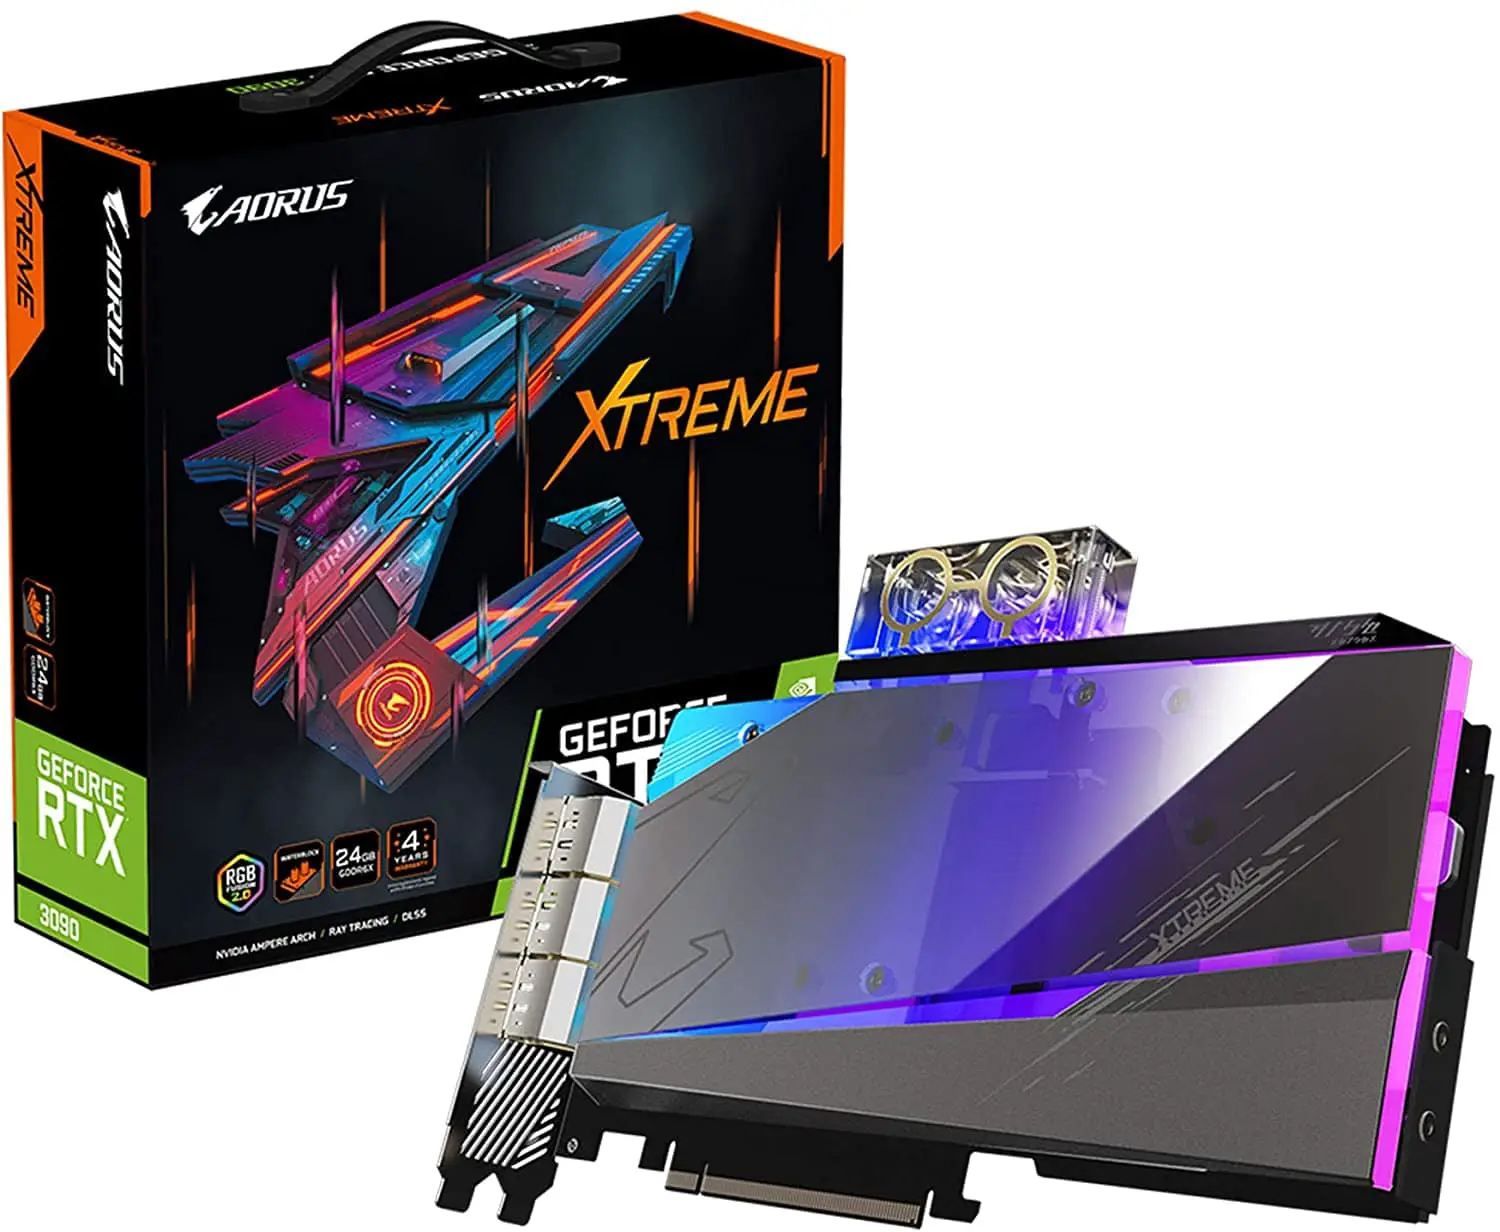 GIGABYTE AORUS GeForce RTX 3090 Xtreme WATERFORCE WB Water Block Cooling System